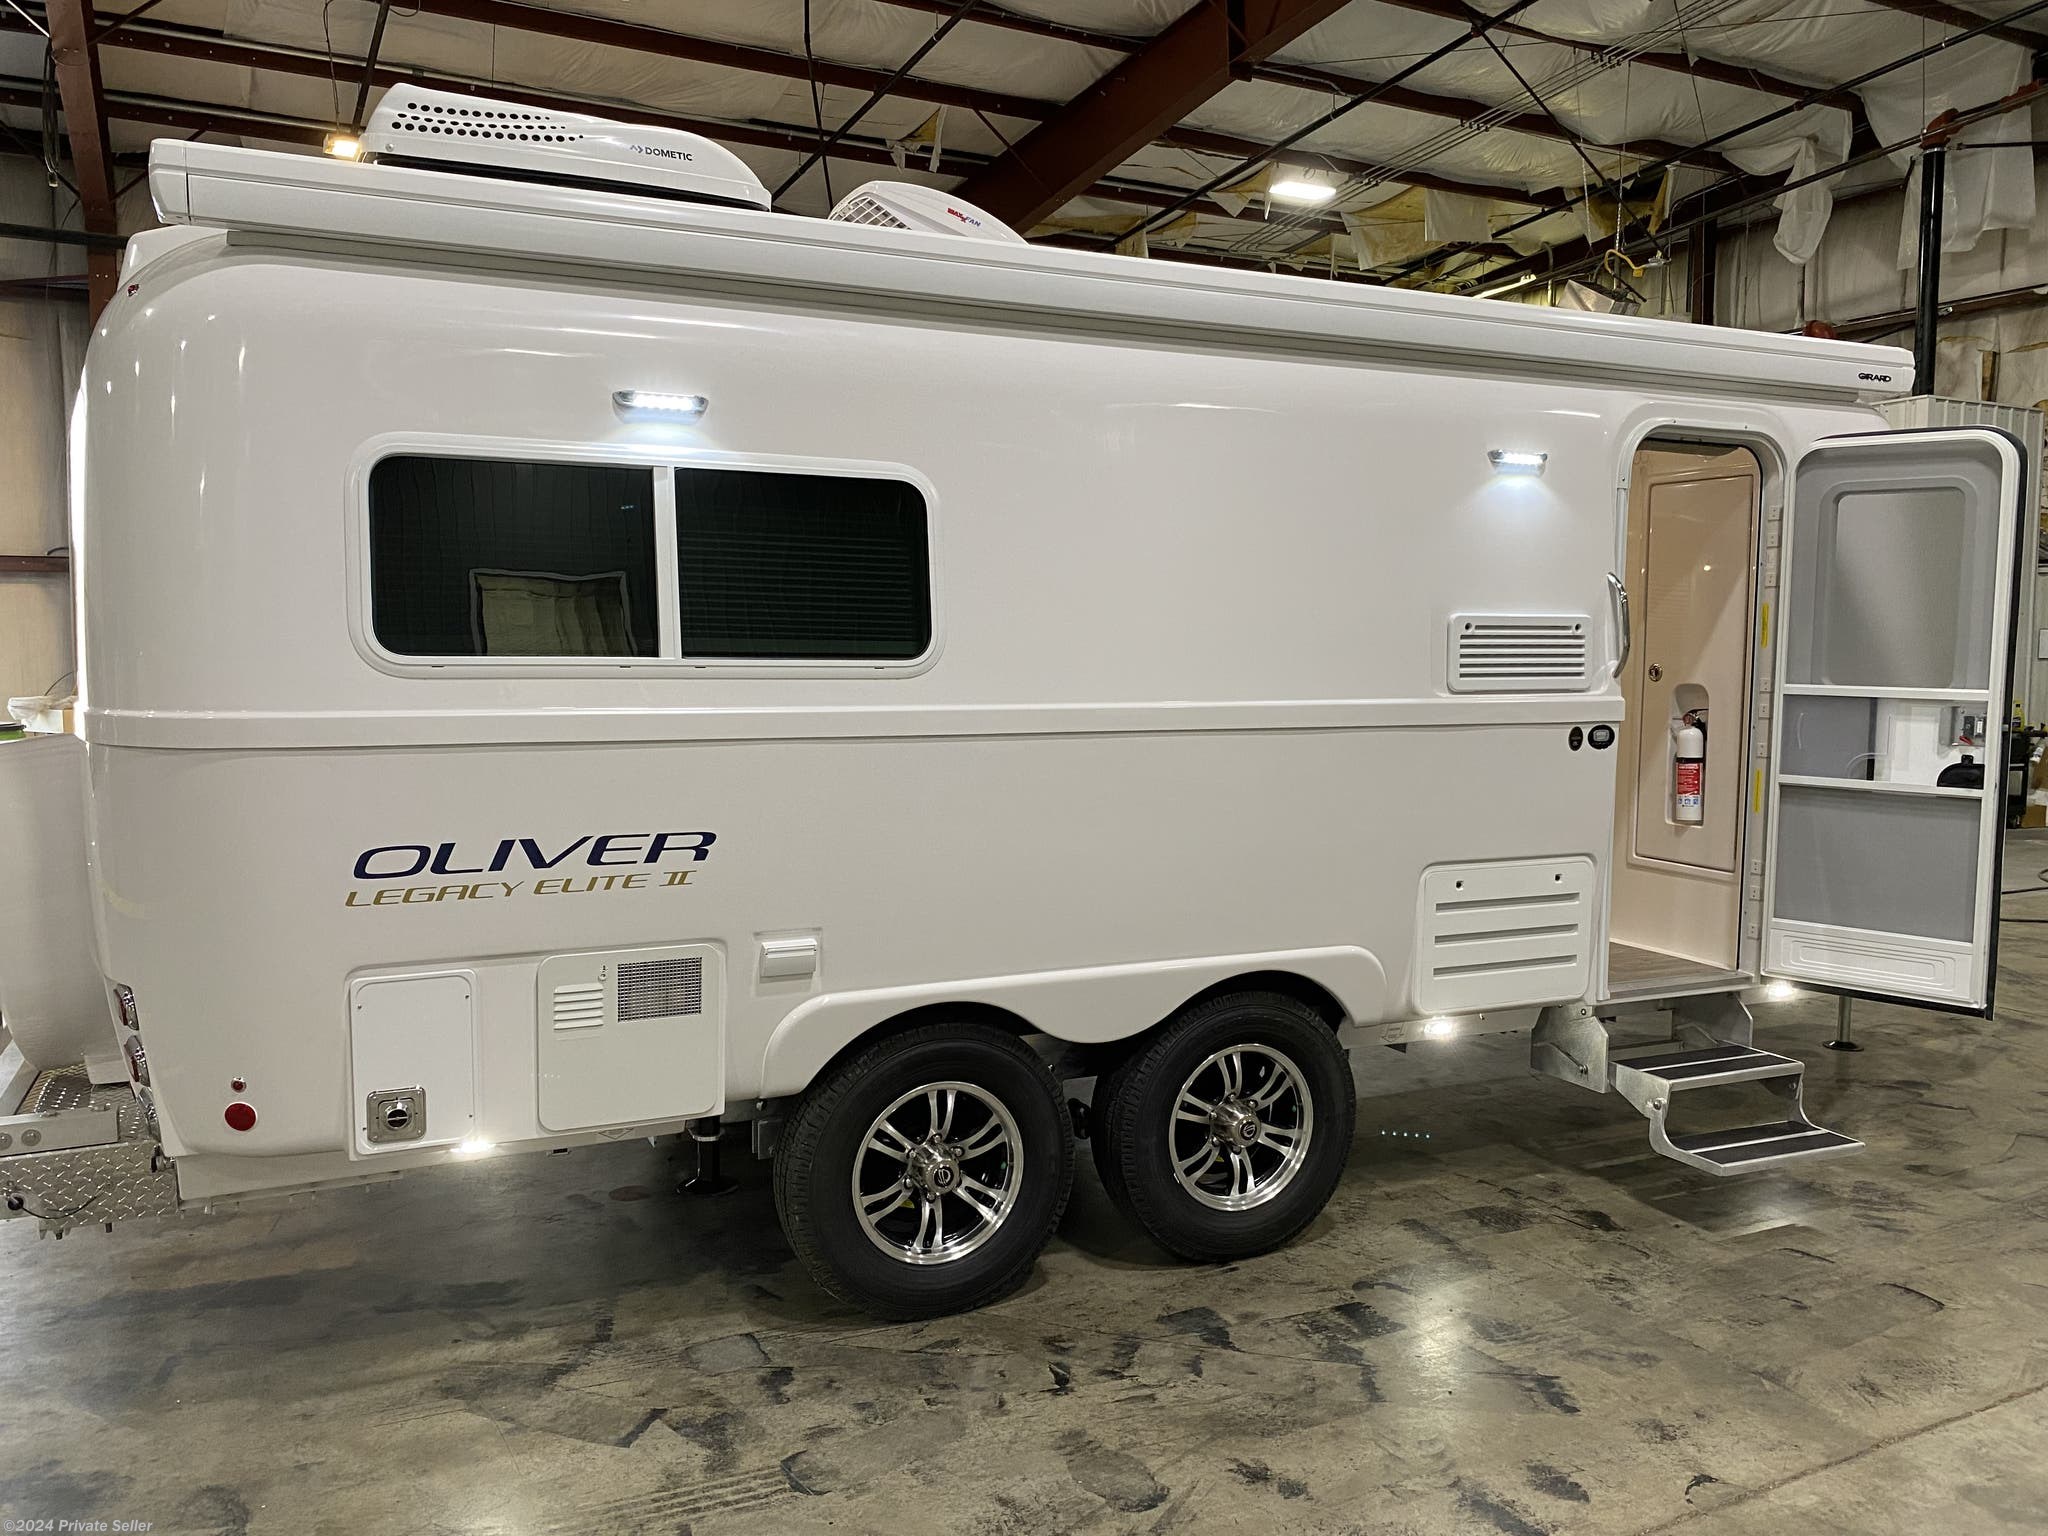 oliver travel trailers for sale